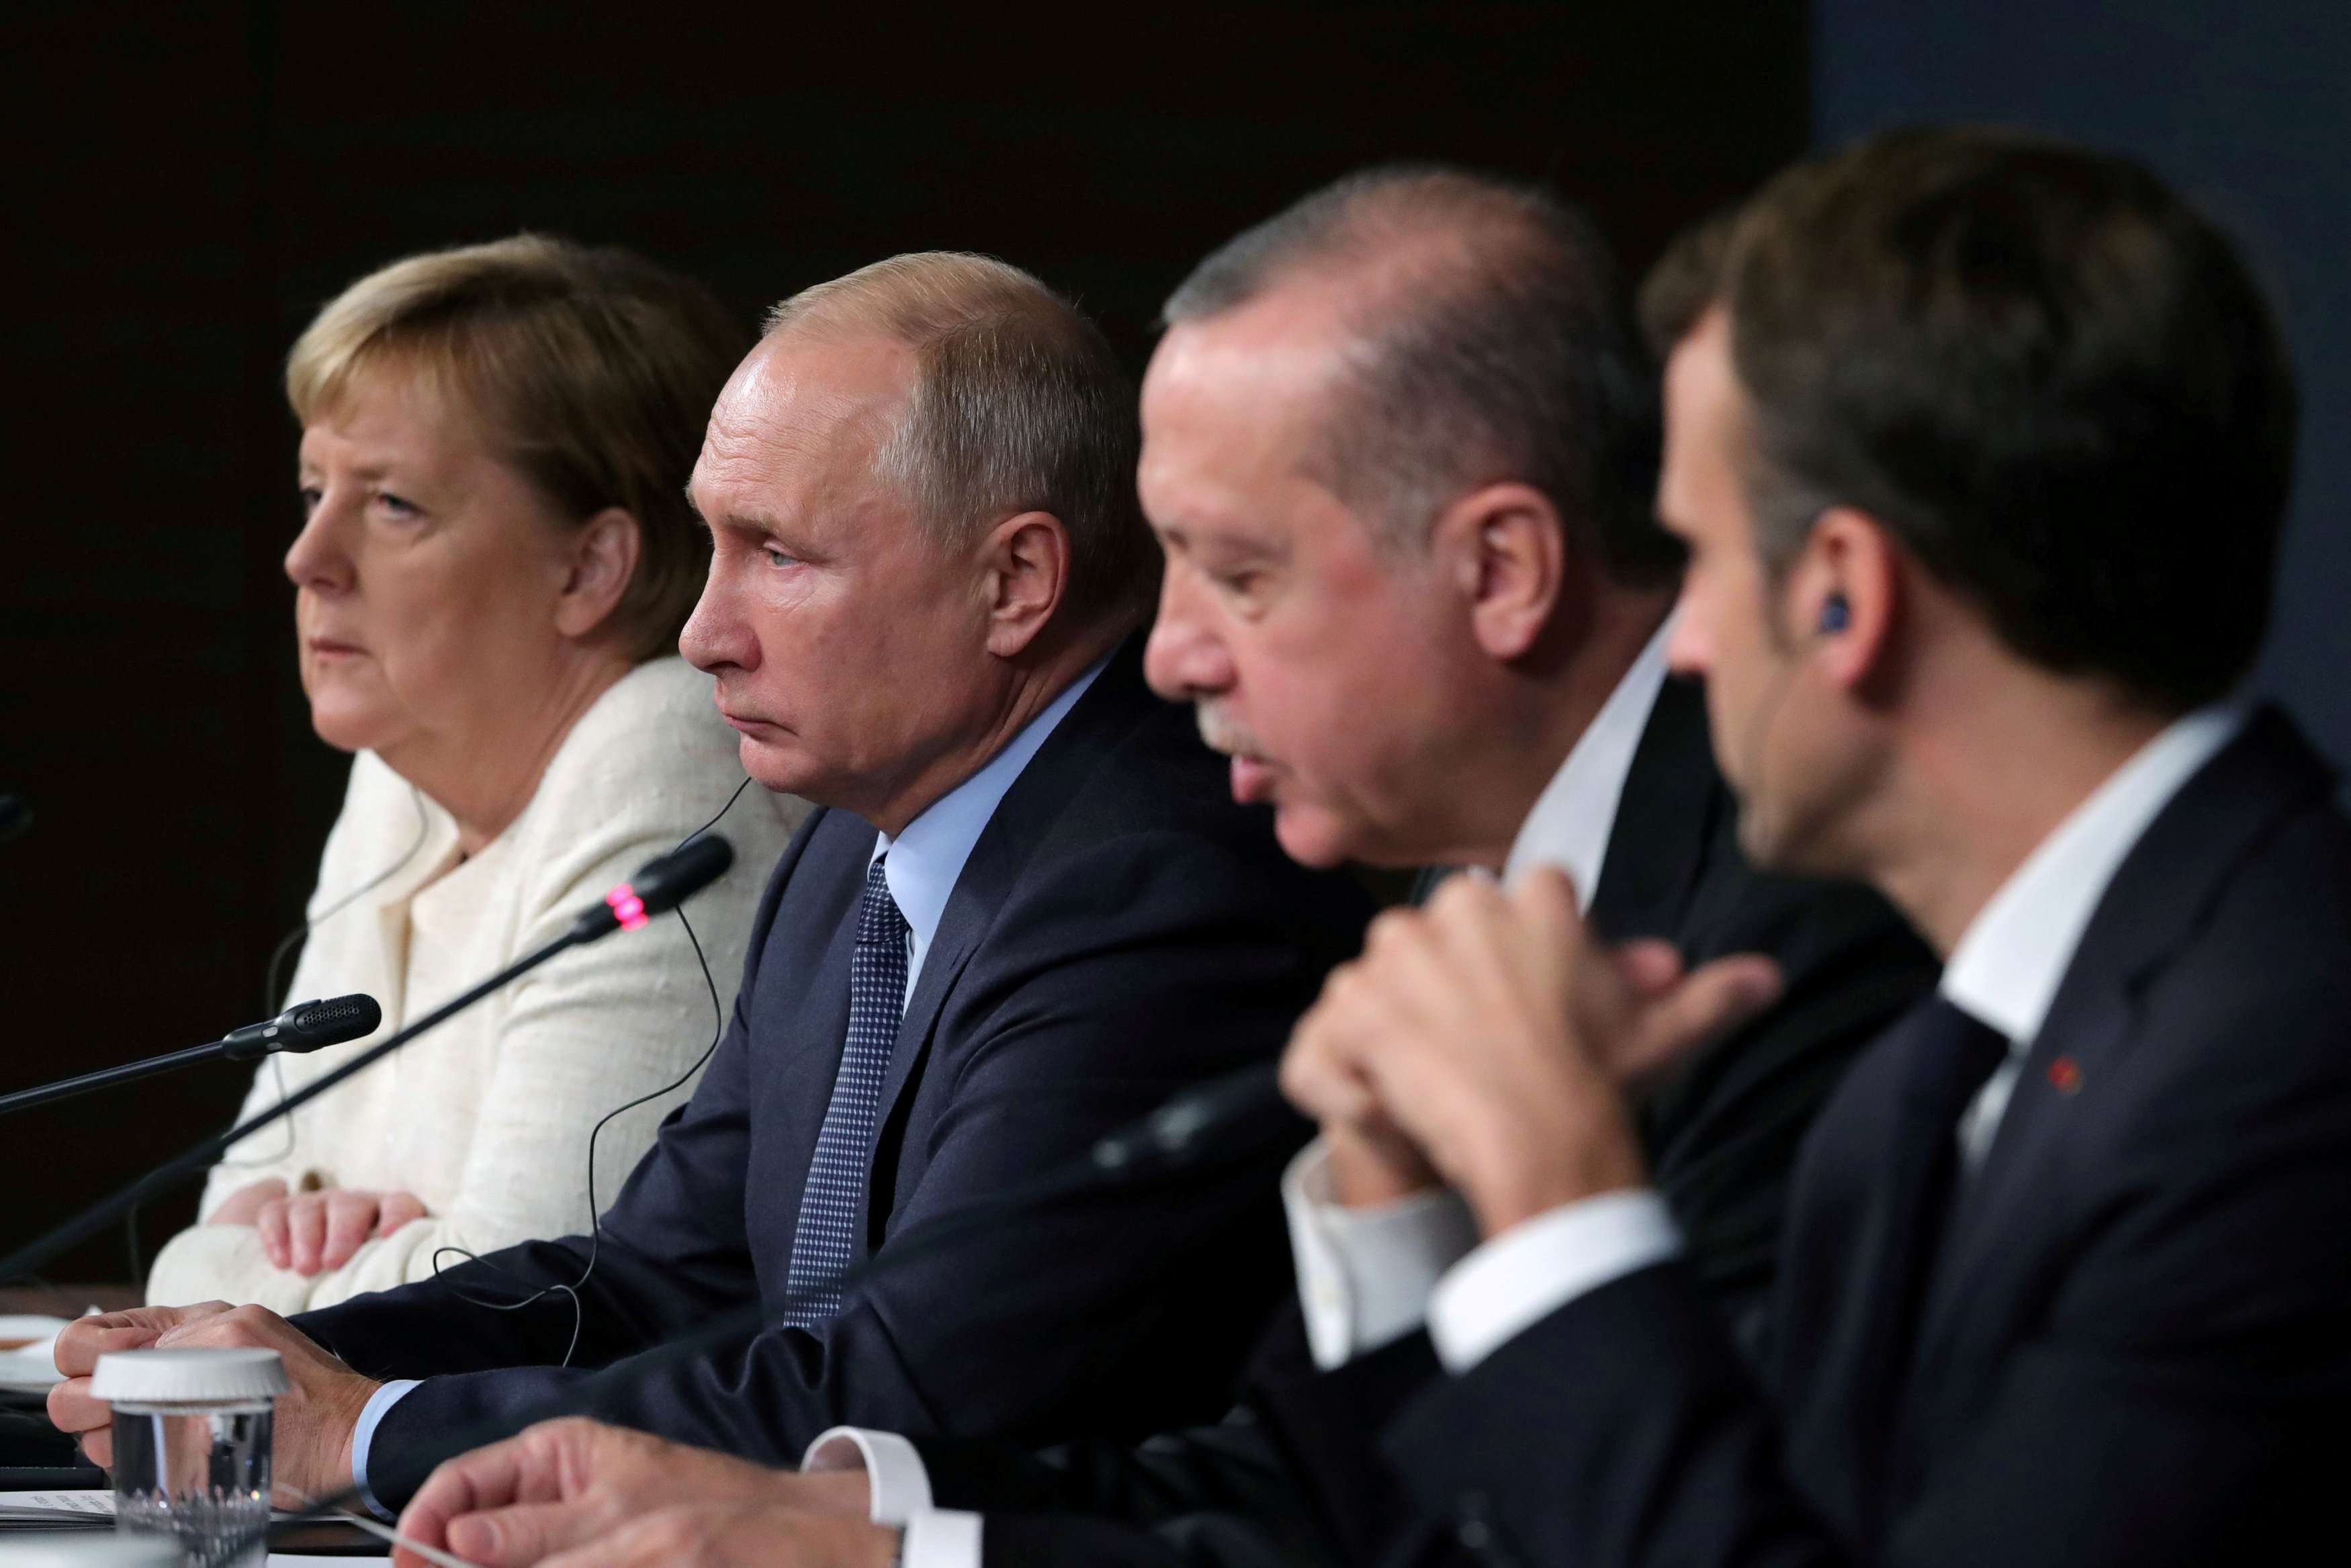 Leaders attend a news conference at Syria summit in Istanbul, Turkey, October 27 2018.